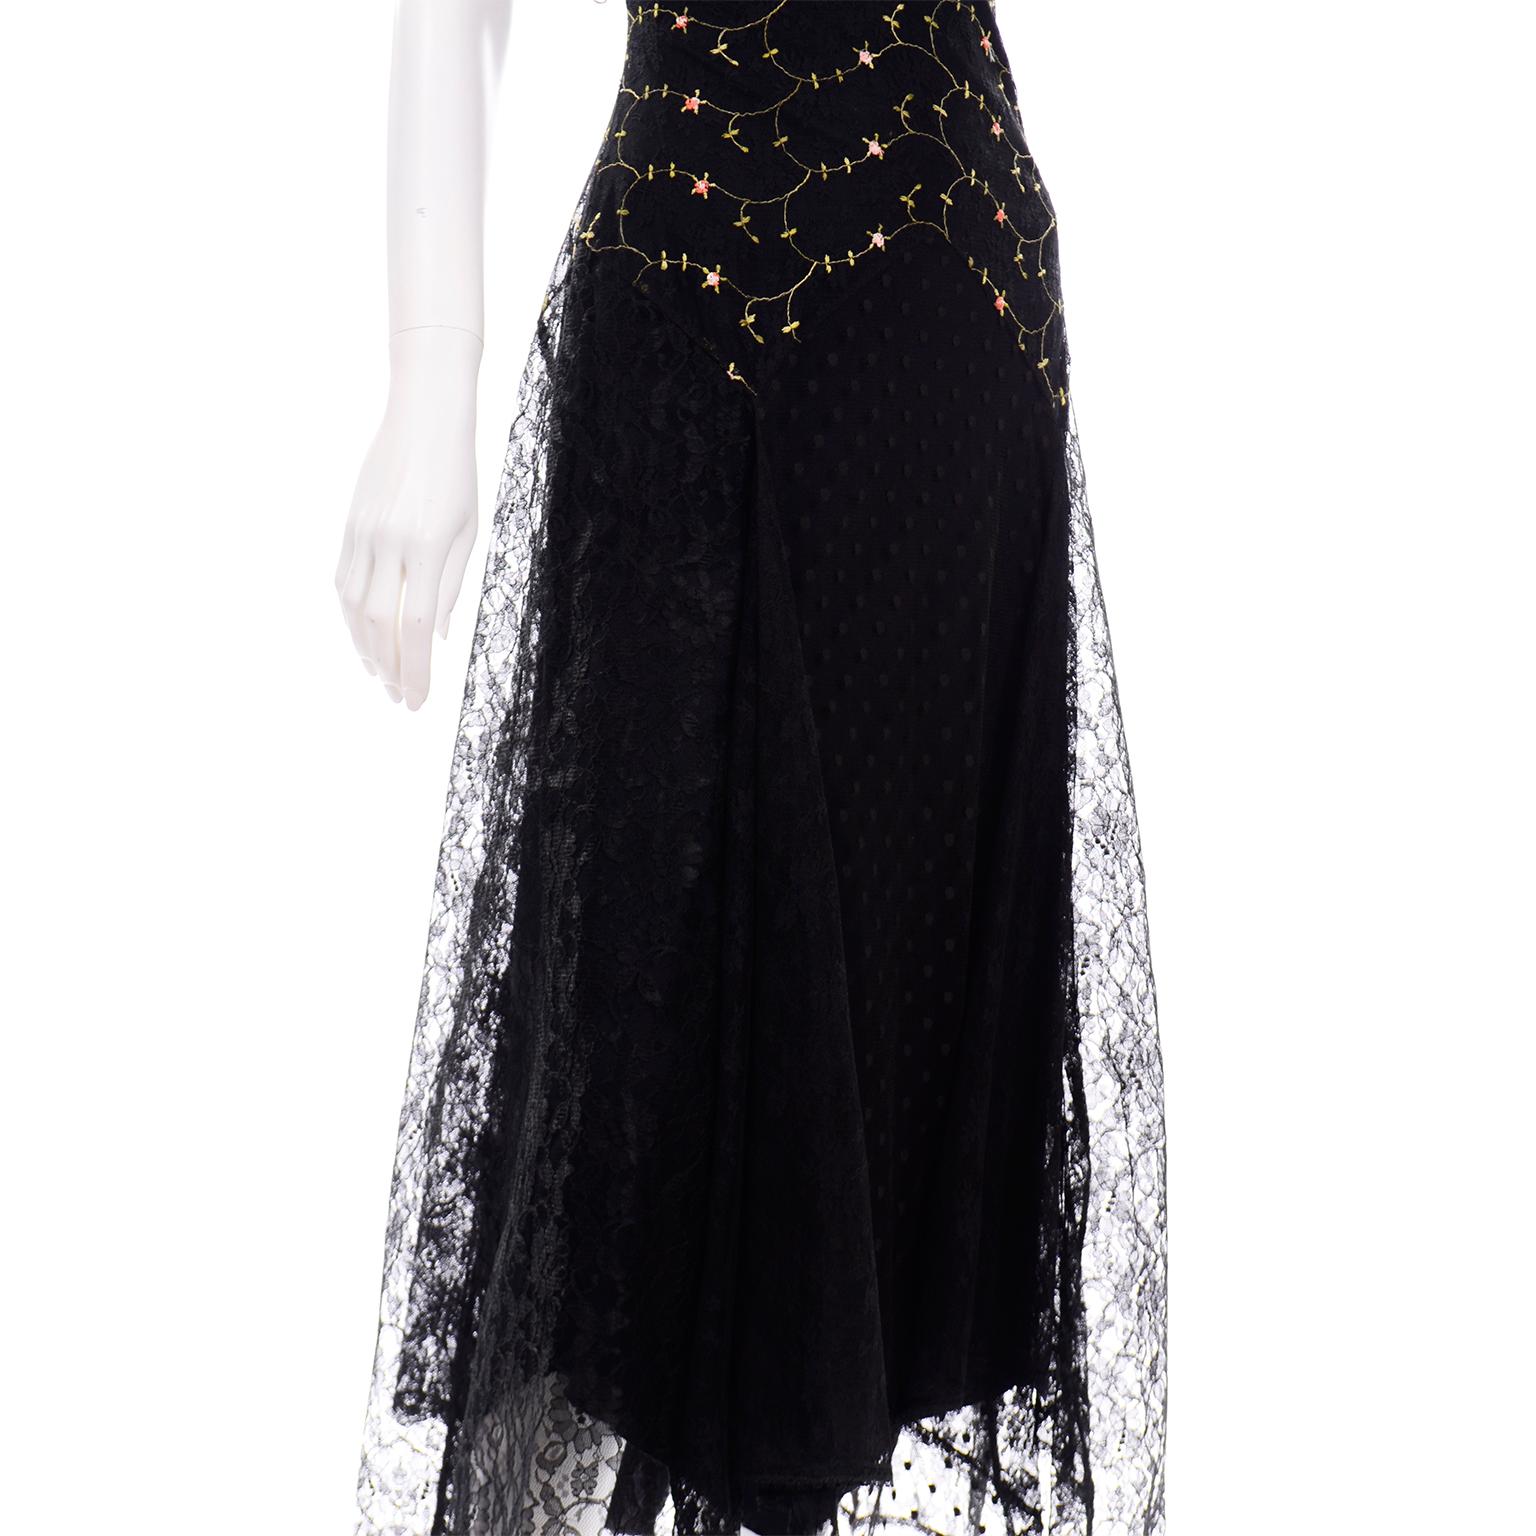 1990s Betsey Johnson Black Dot Lace Vintage Evening Dress w Floral Embroidery 1